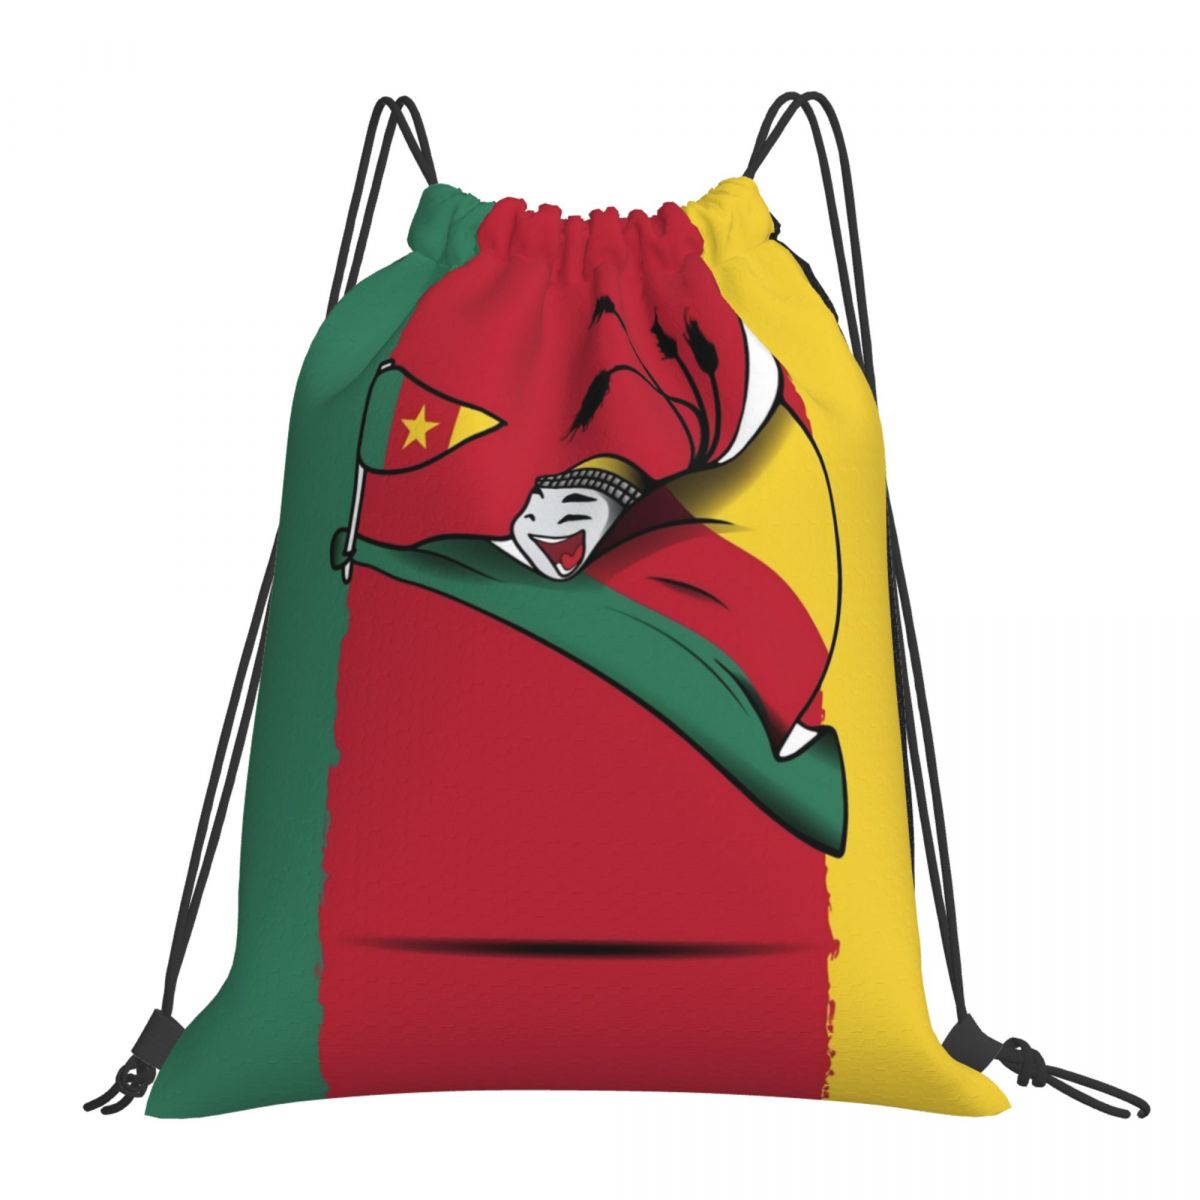 Cameroon World Cup 2022 Mascot Drawstring Bags for School Gym